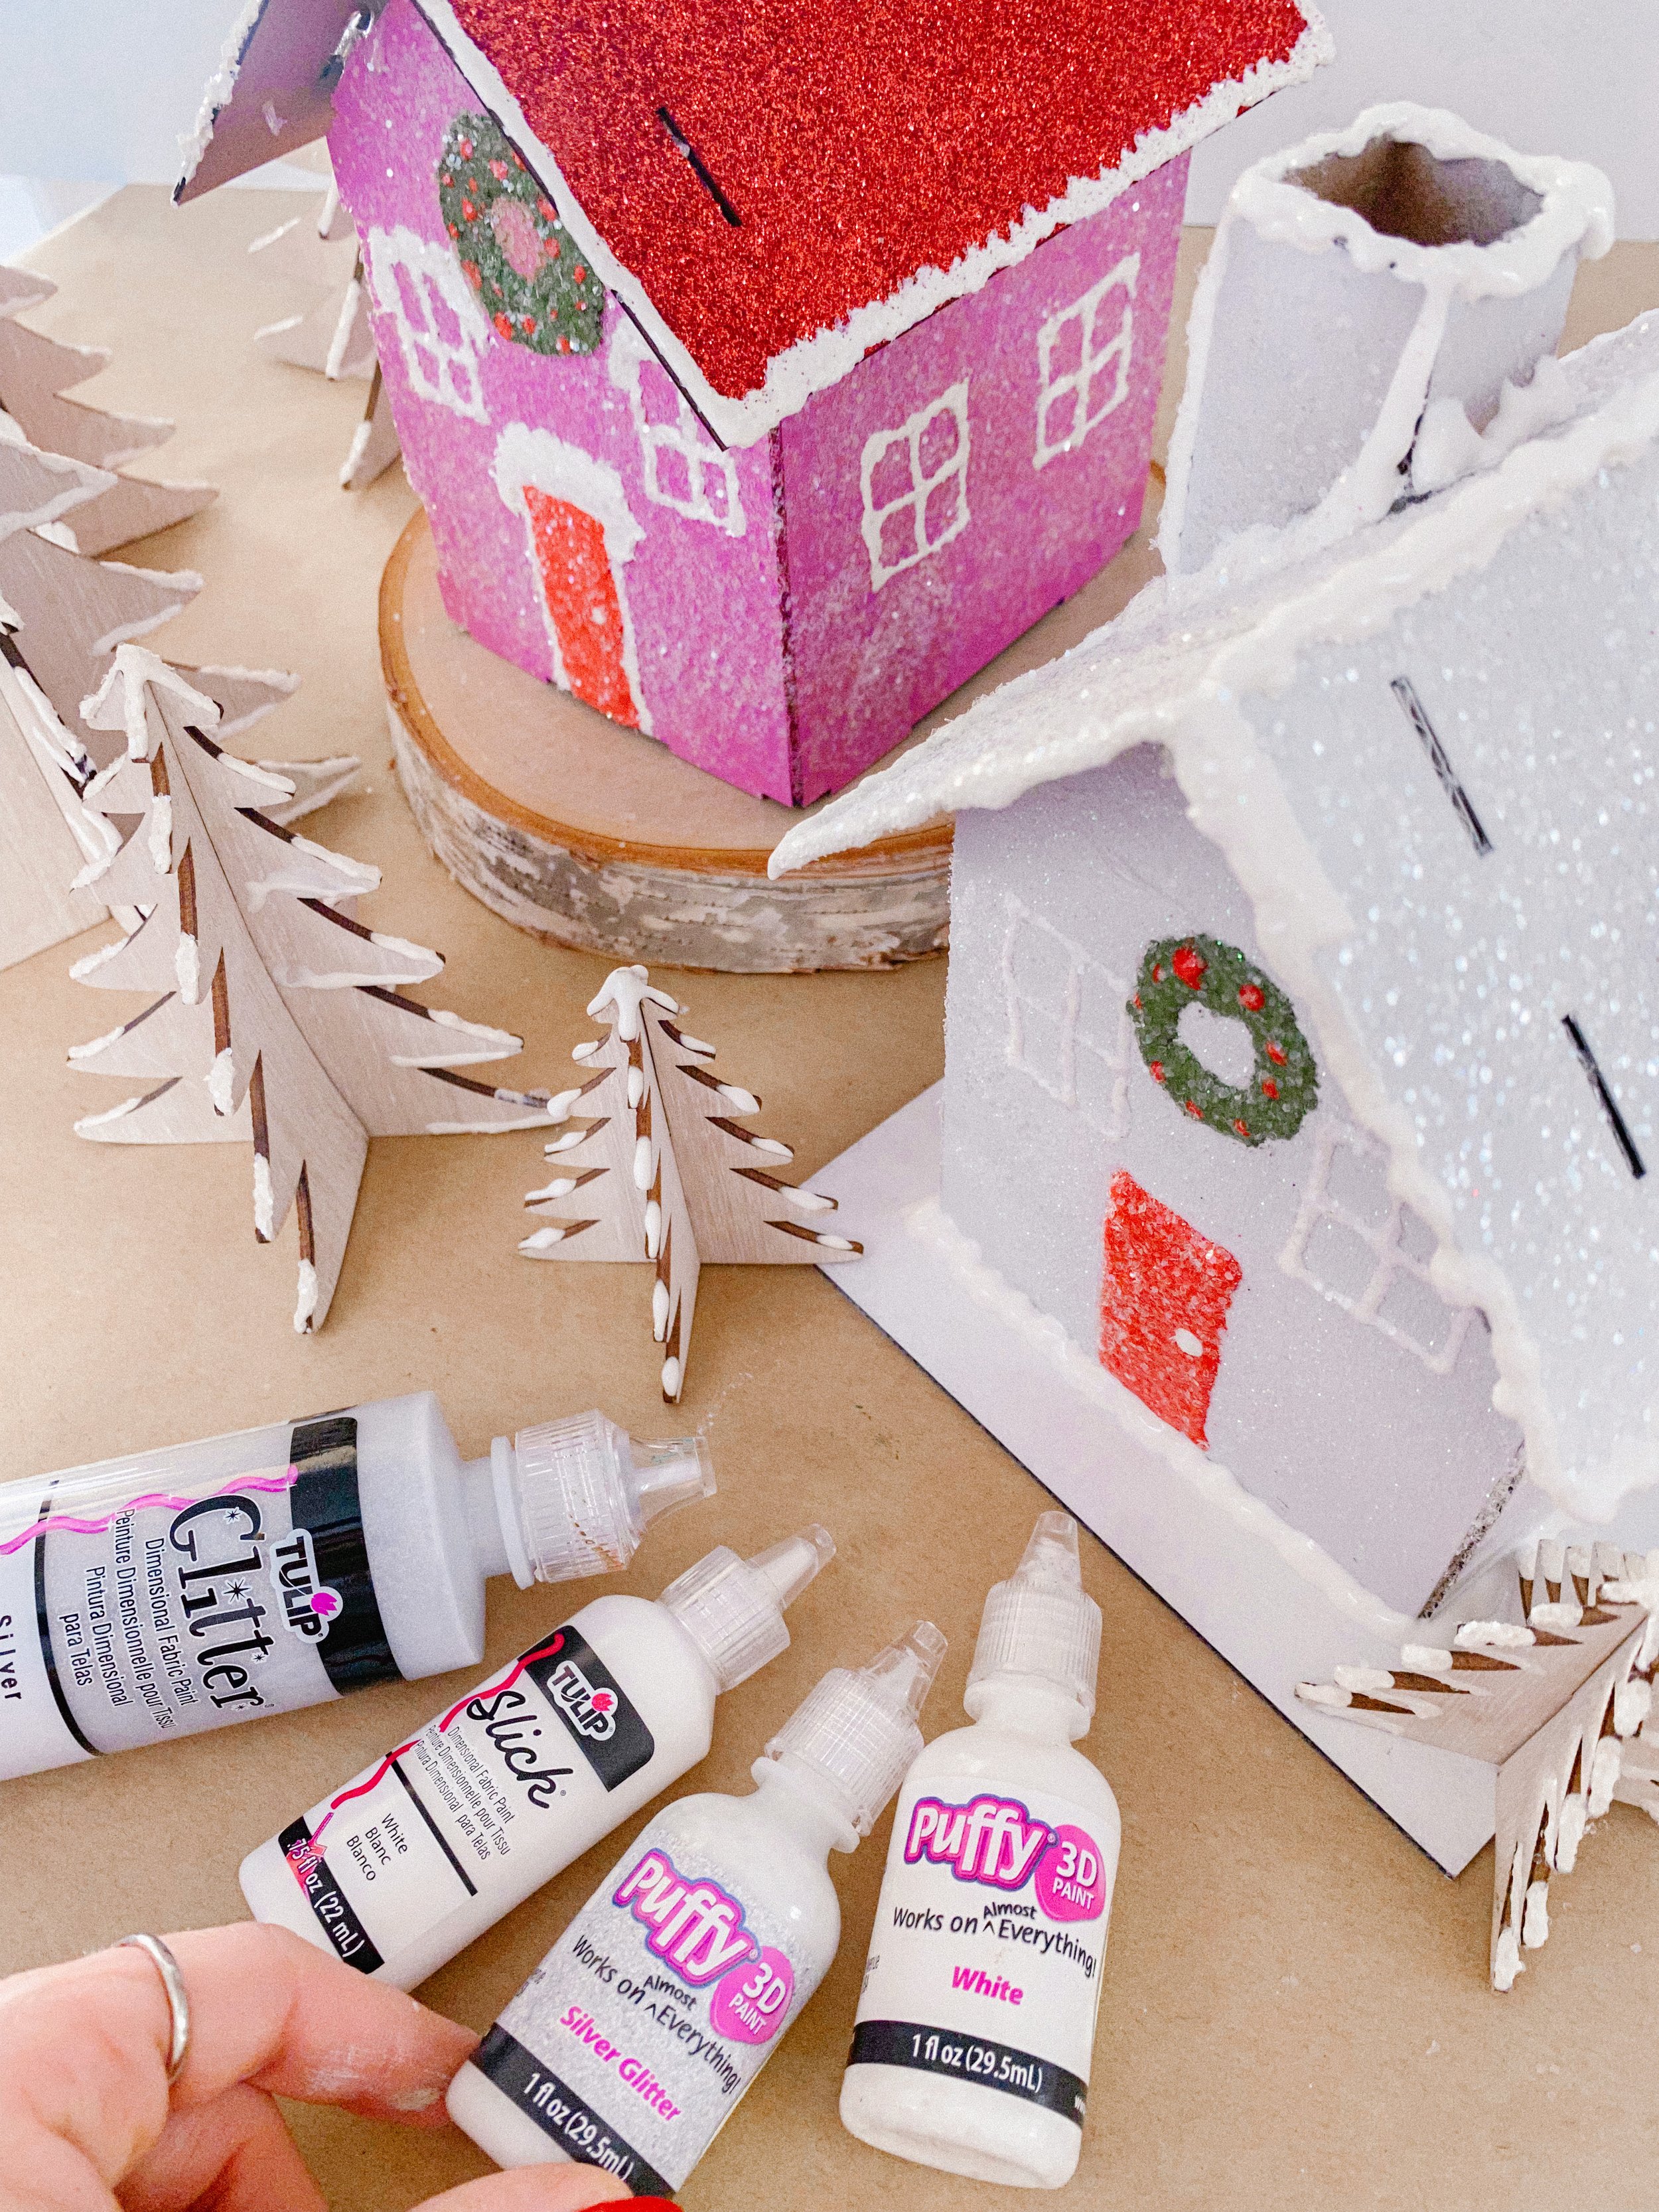 DIY Gingerbread and Putz House Craft — From Scratch with Maria Provenzano